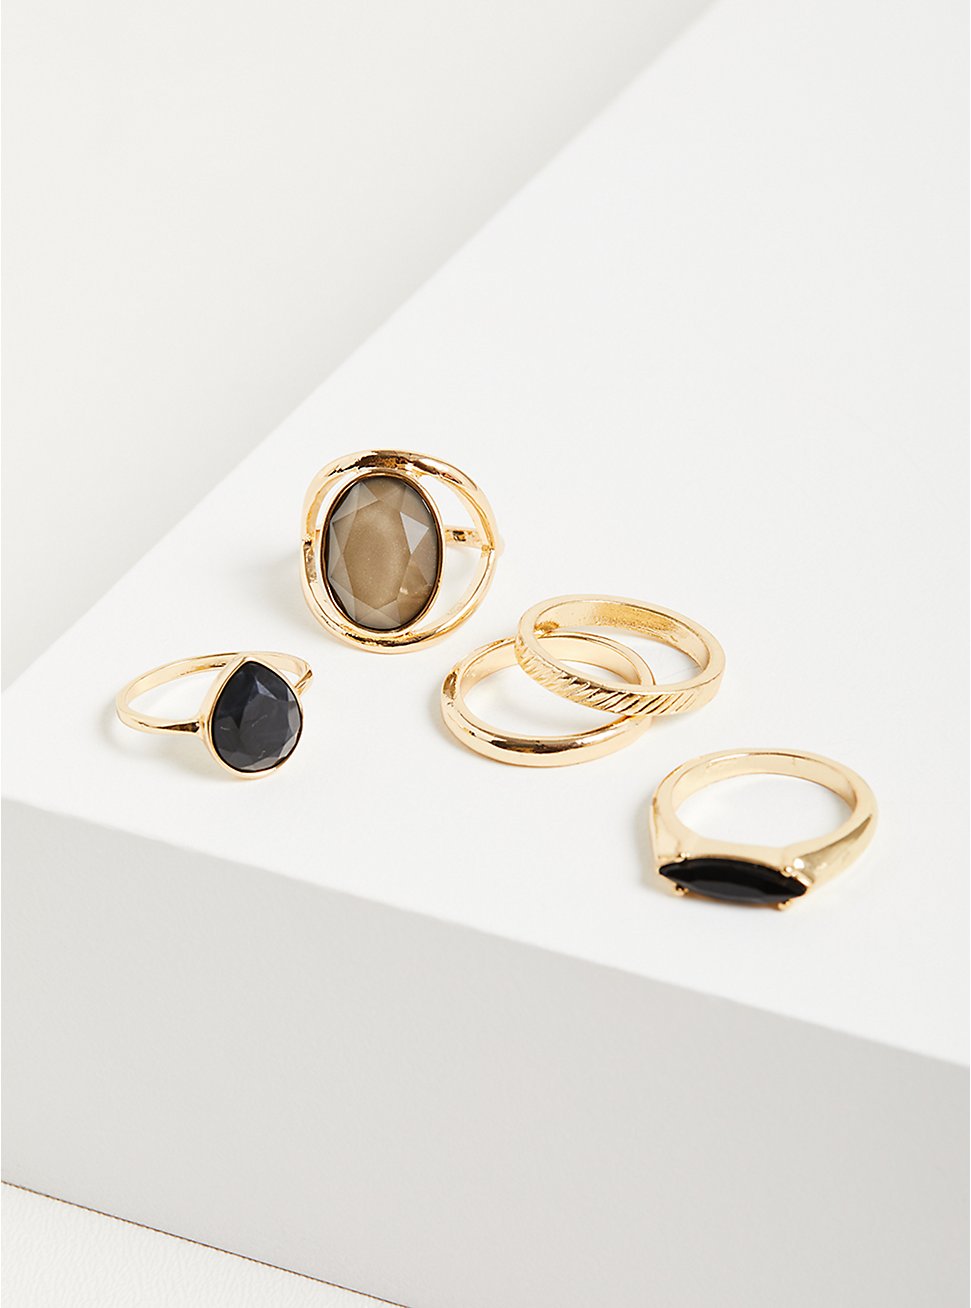 Cocktail Ring Set of 4 - Gold Tone & Grey Stone, GOLD, hi-res